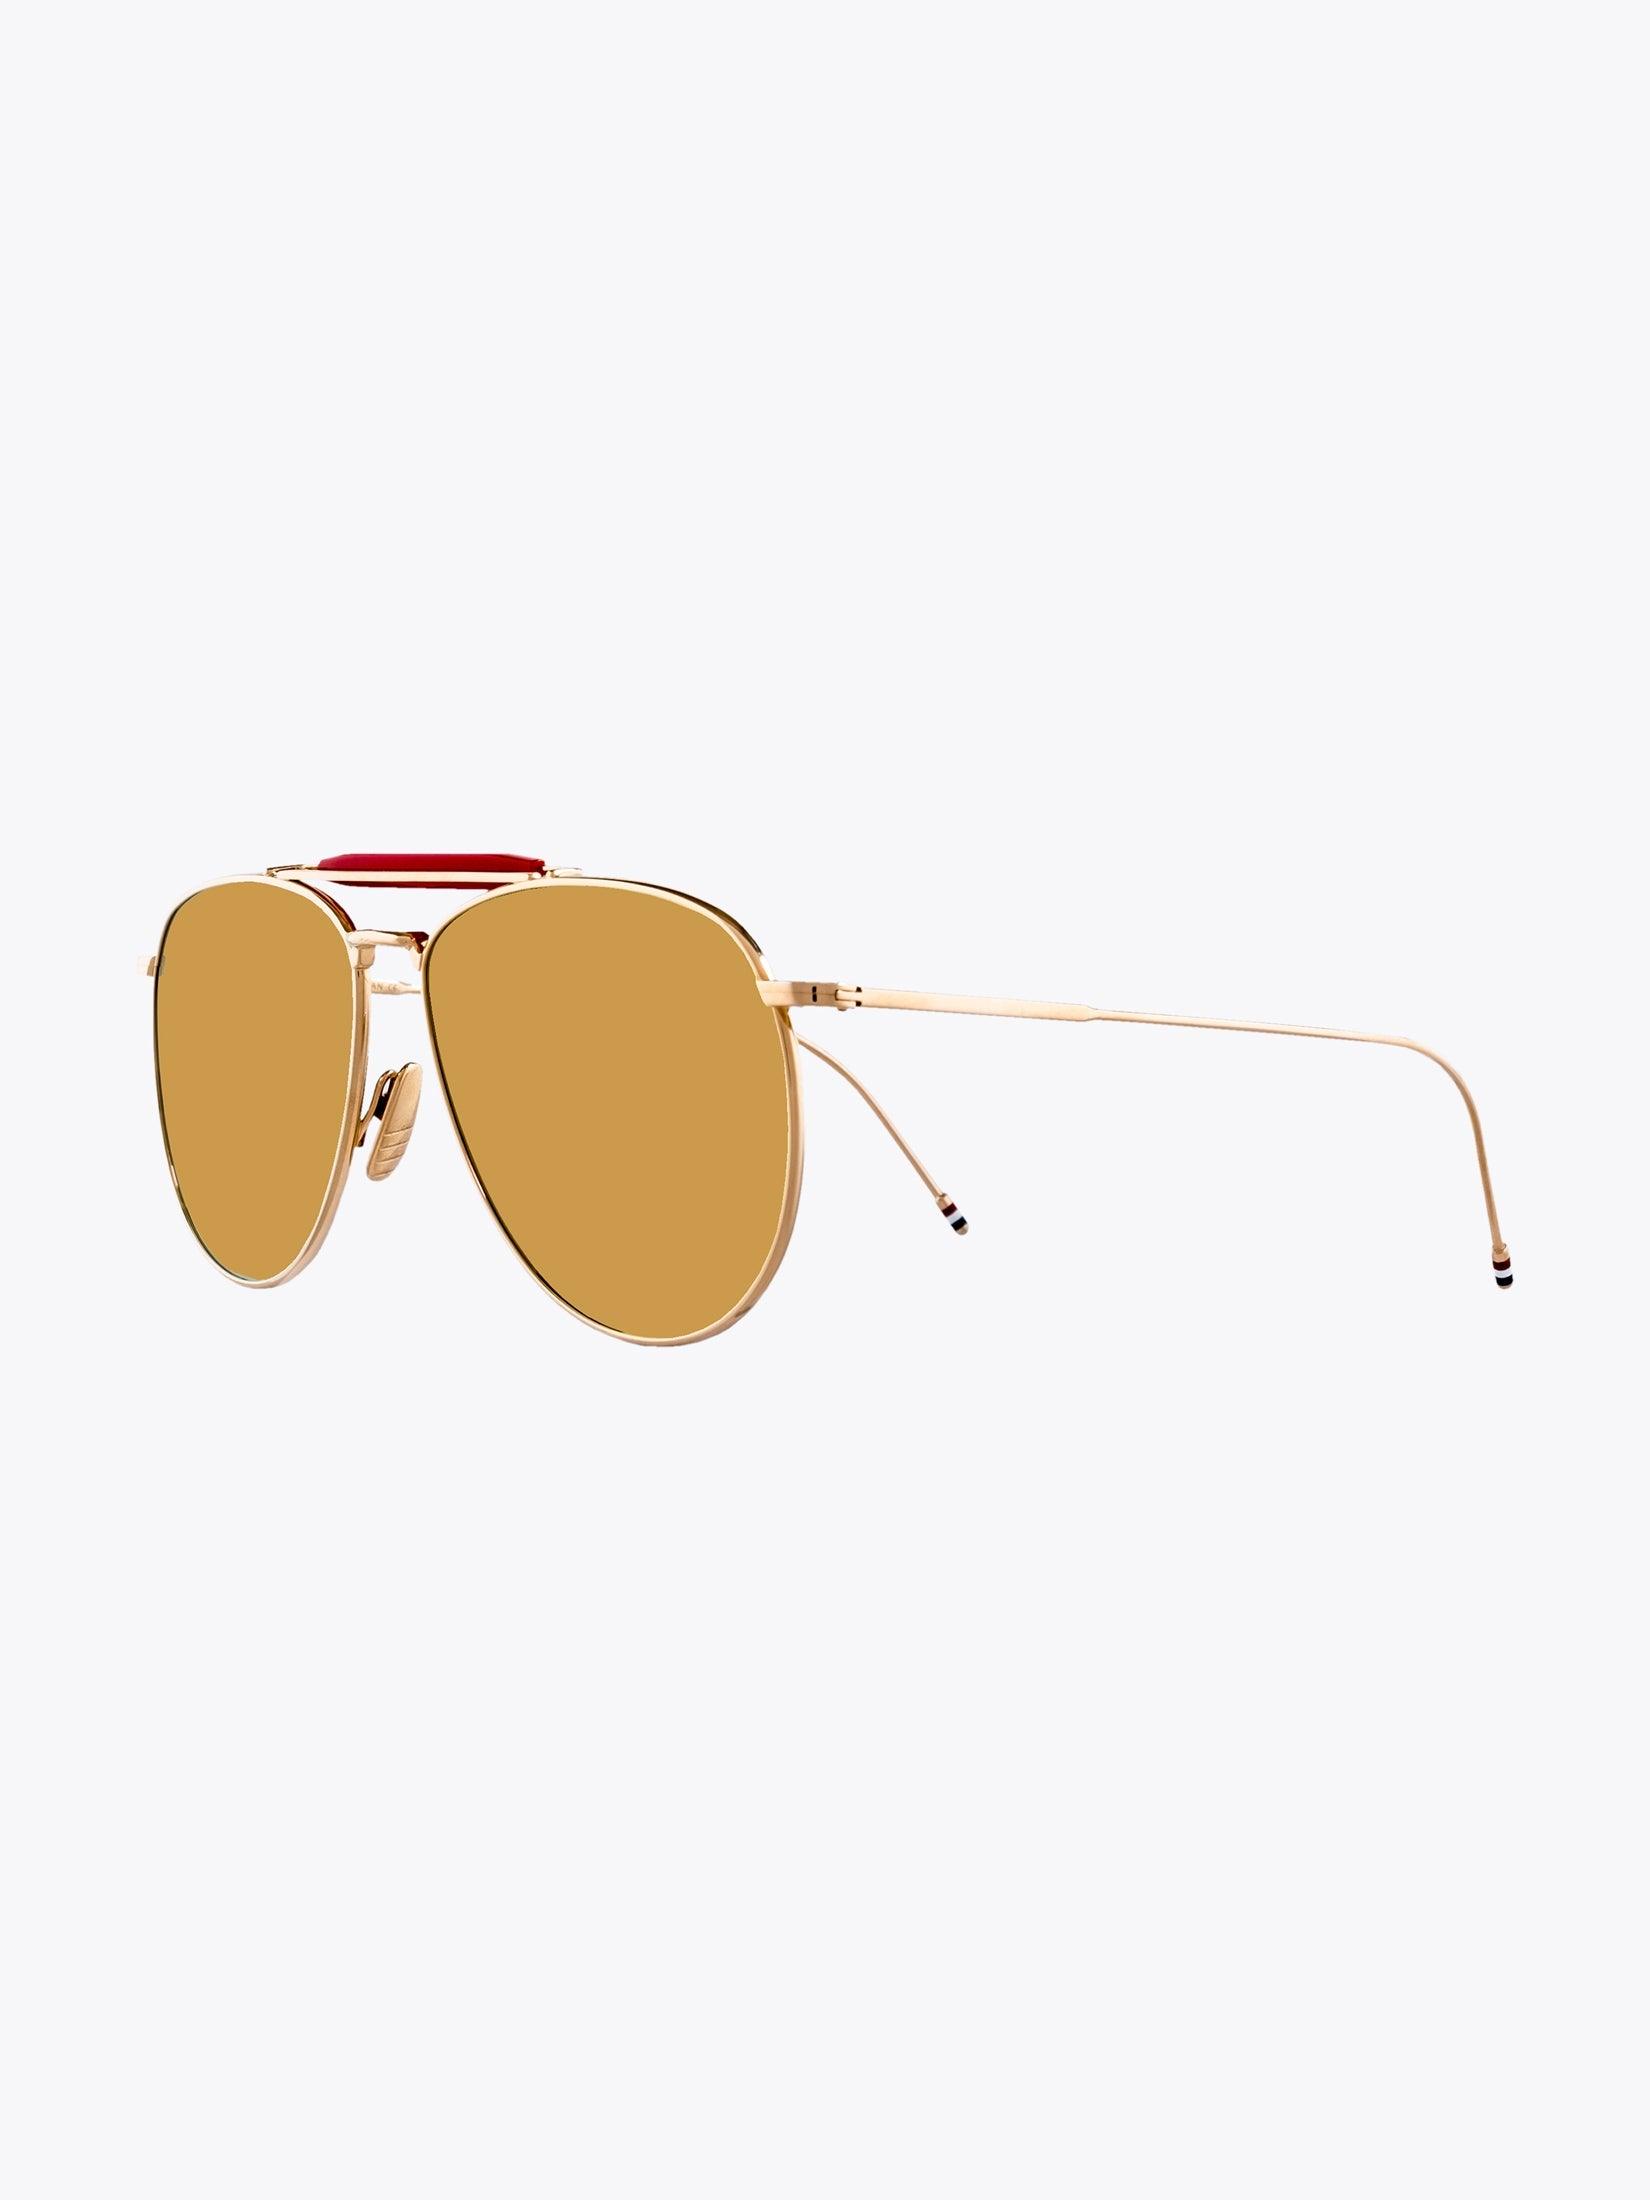 Thom Browne TB-015 Sonnenbrille Gold